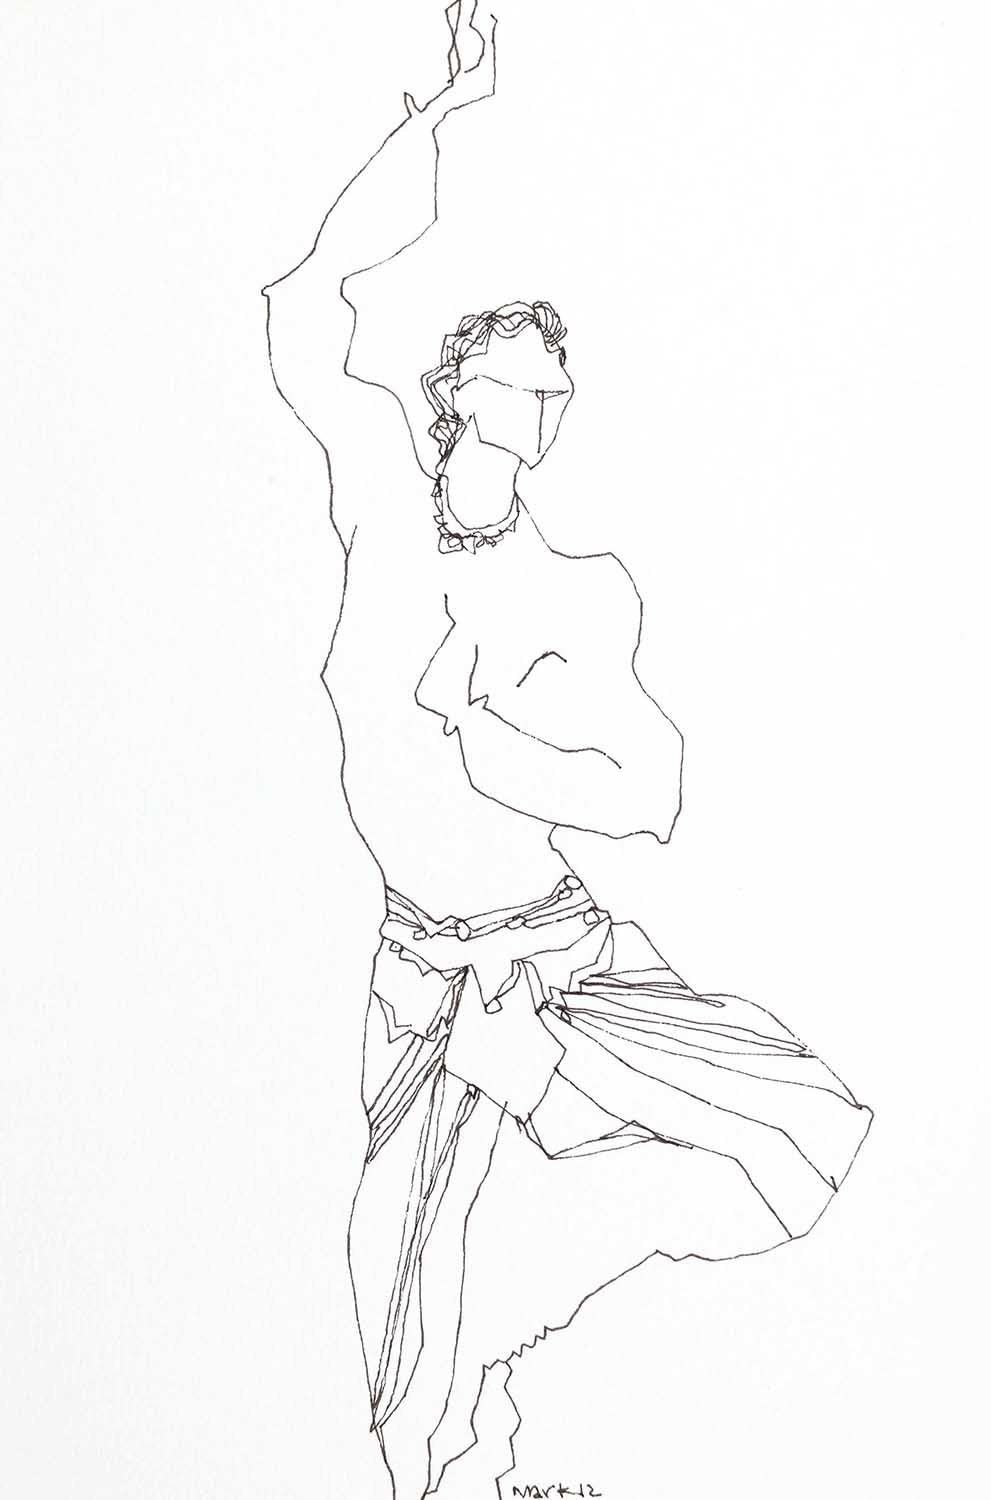 Performer 175|S. Mark Rathinaraj- Pen and Ink on Paper, , 8.5 x 5.5 inches